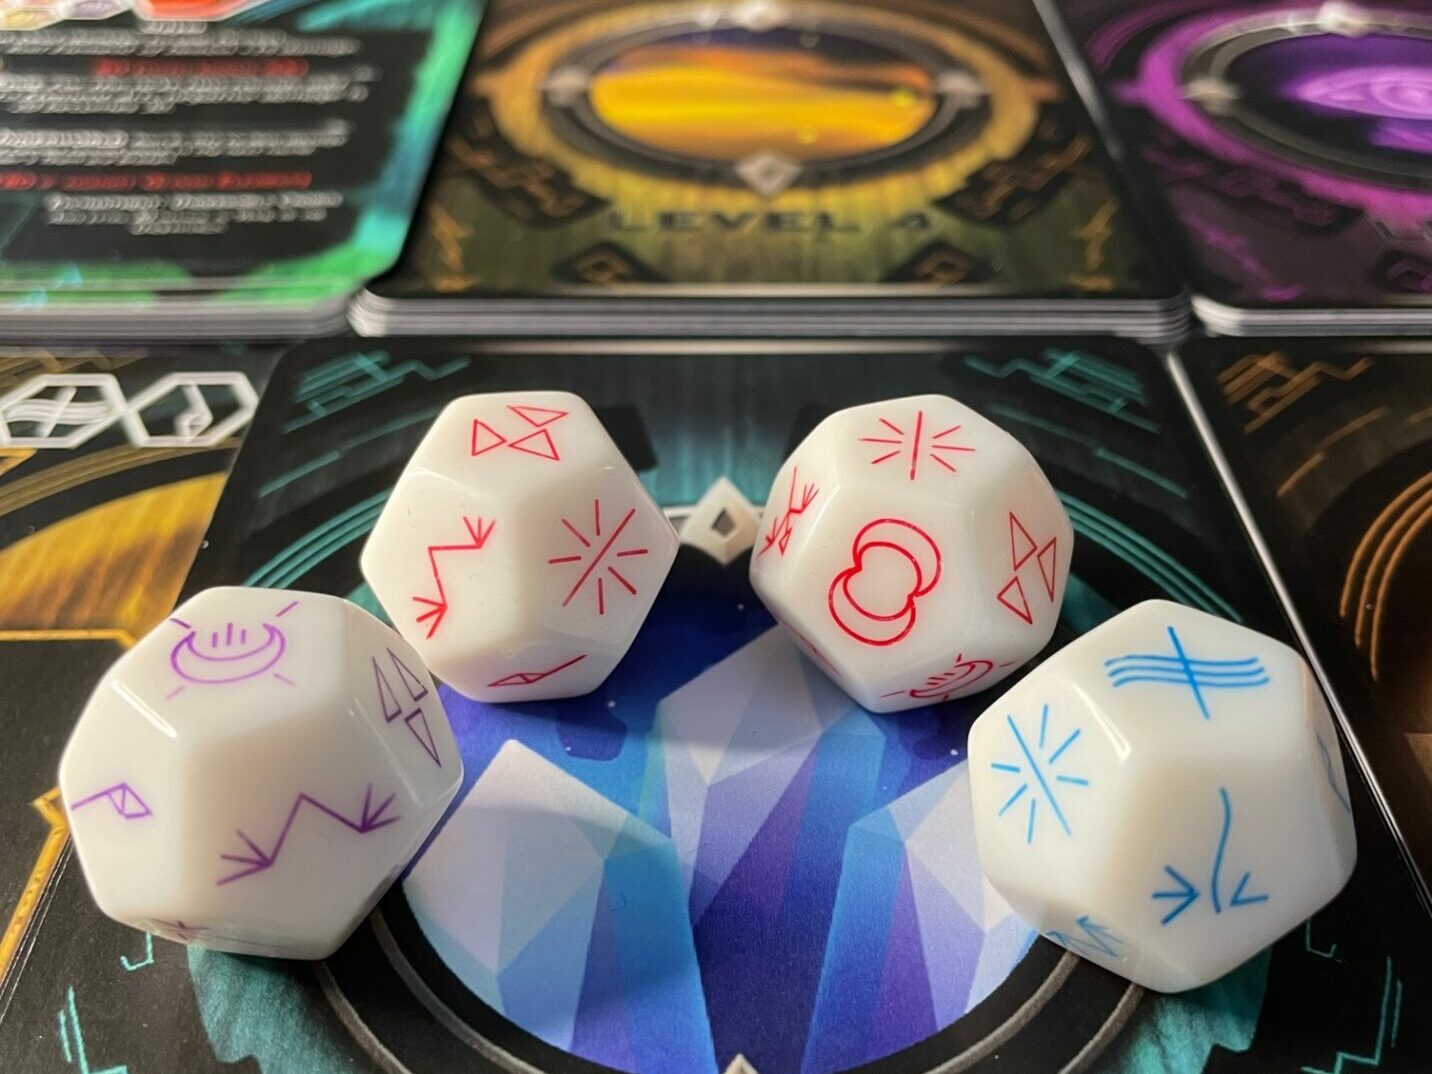 spirit dice from the game